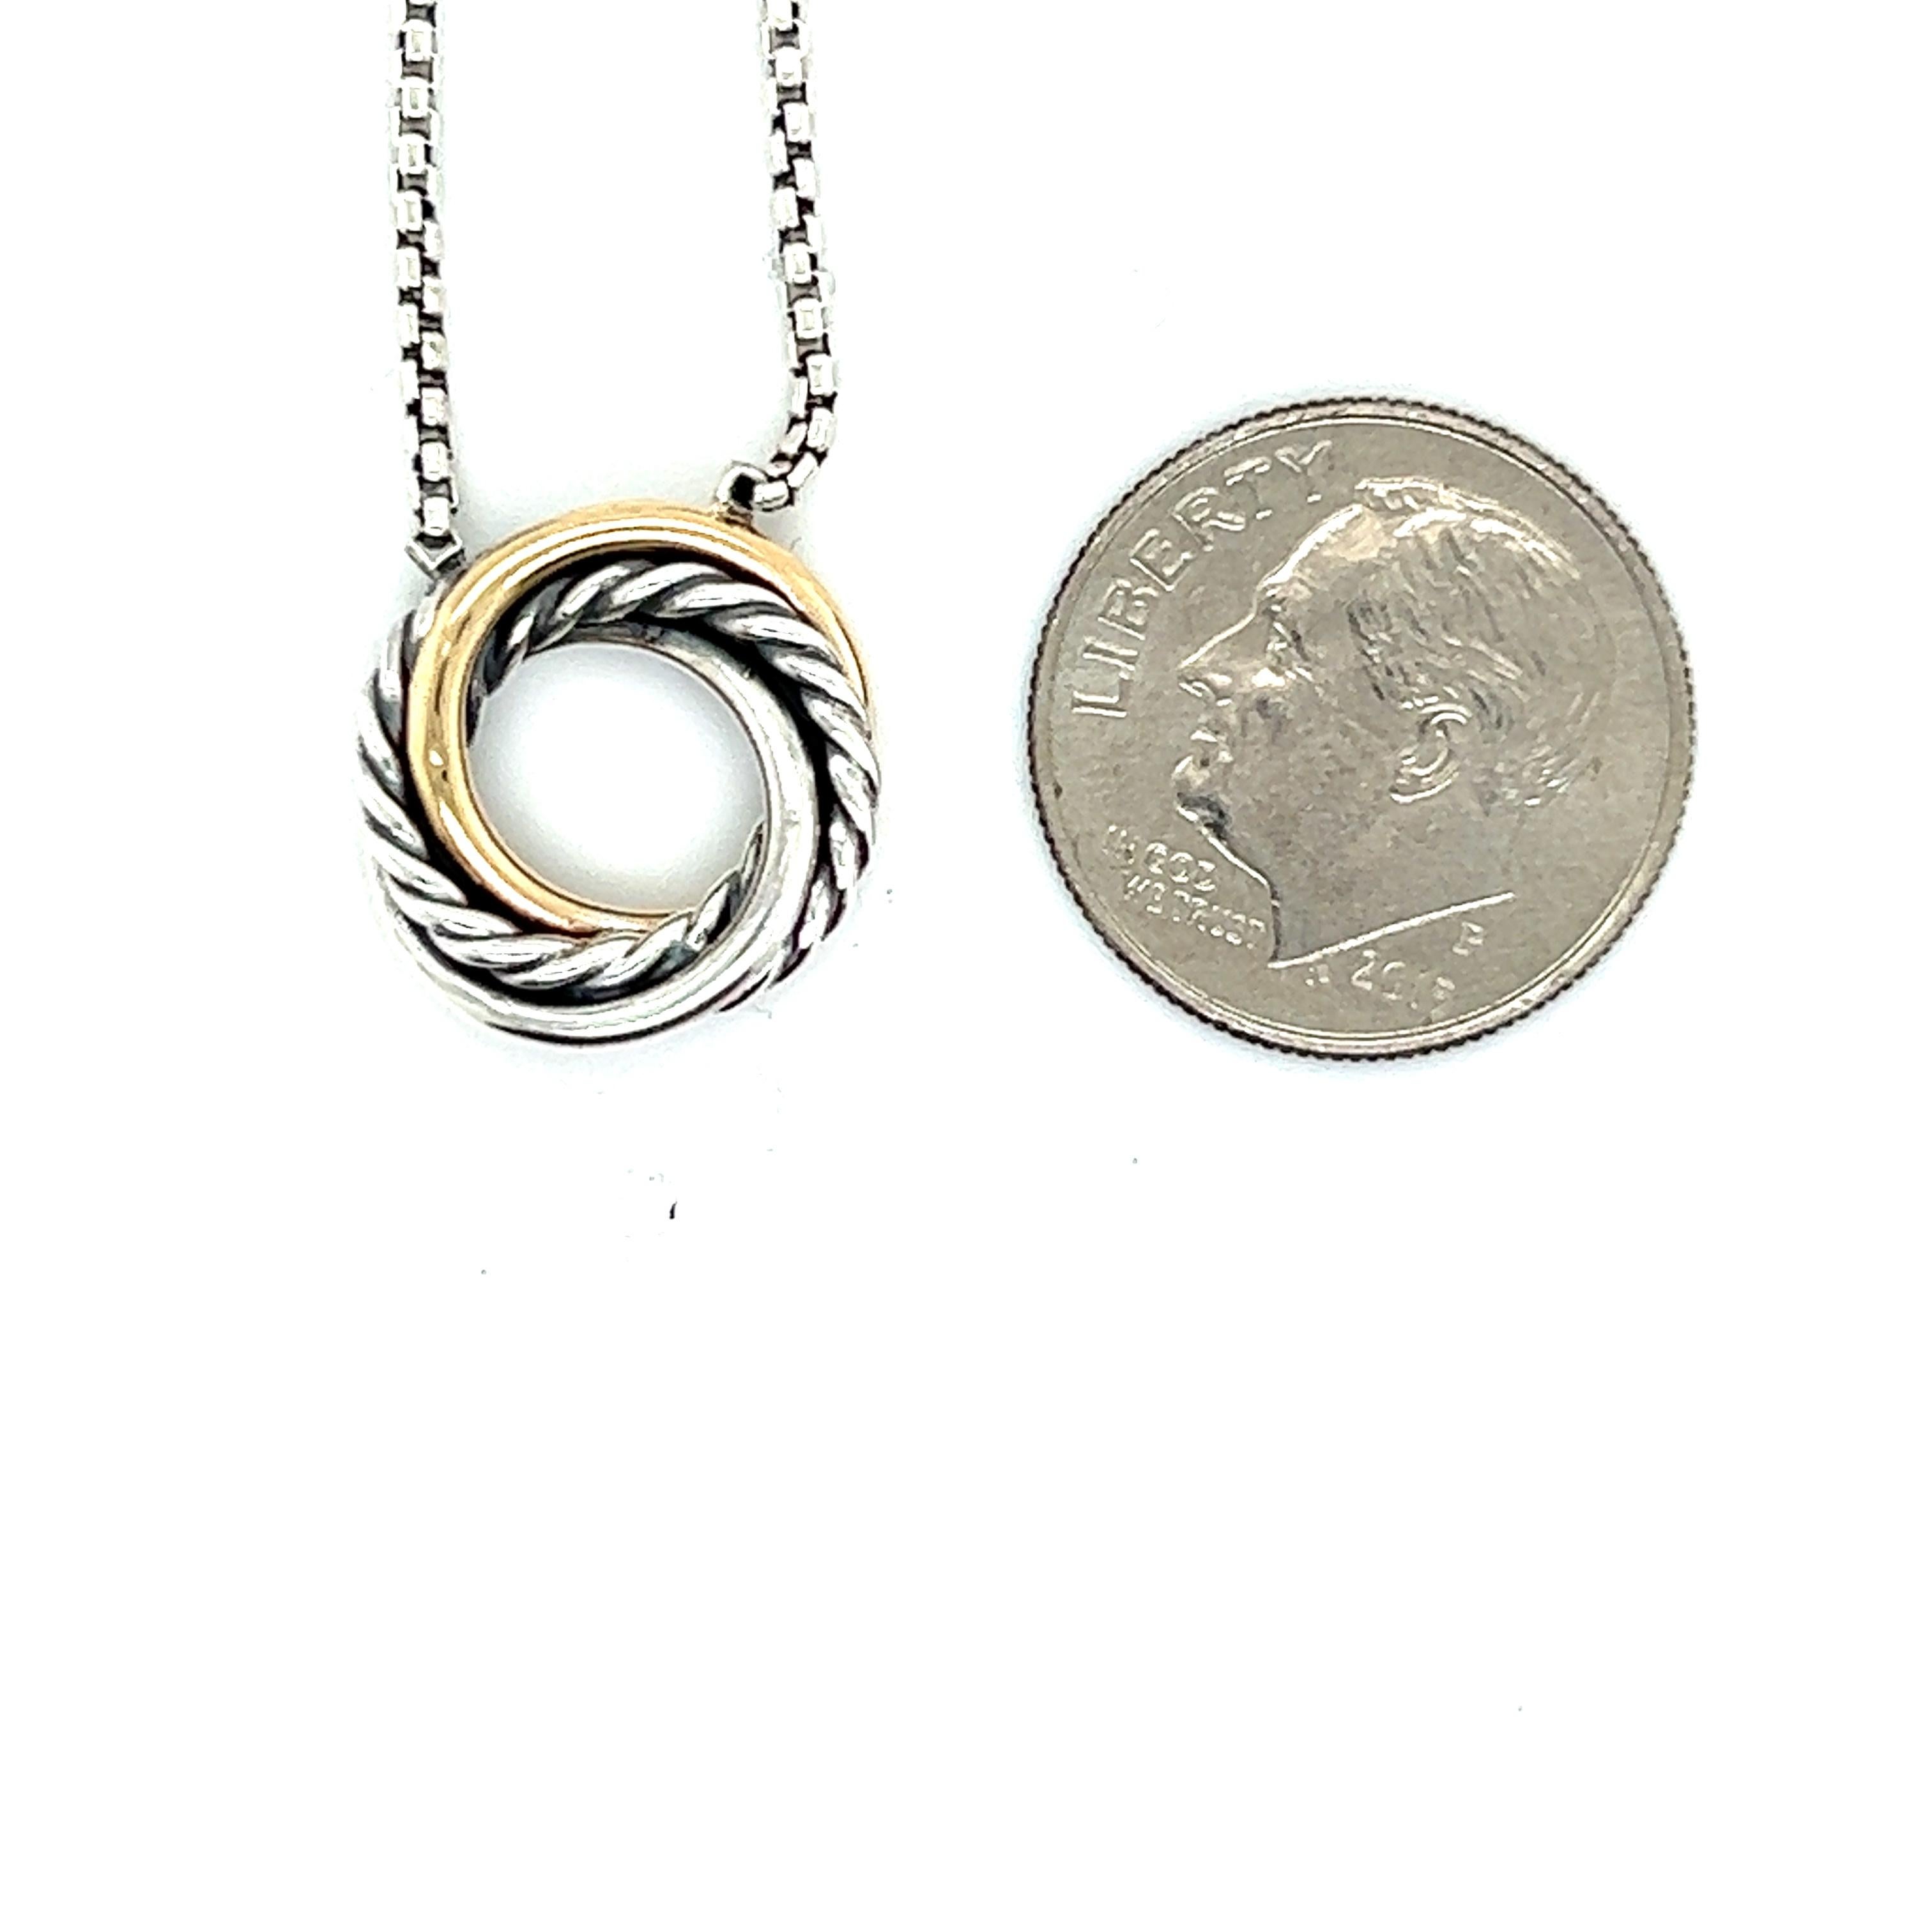 Authentic David Yurman Estate Crossover Pendant Necklace 17 - 18 18k Gold + Silver DY251

RETAIL $695.00

This elegant Authentic David Yurman crossover pendant Necklace is made of sterling silver.

TRUSTED SELLER SINCE 2002

PLEASE SEE OUR HUNDREDS